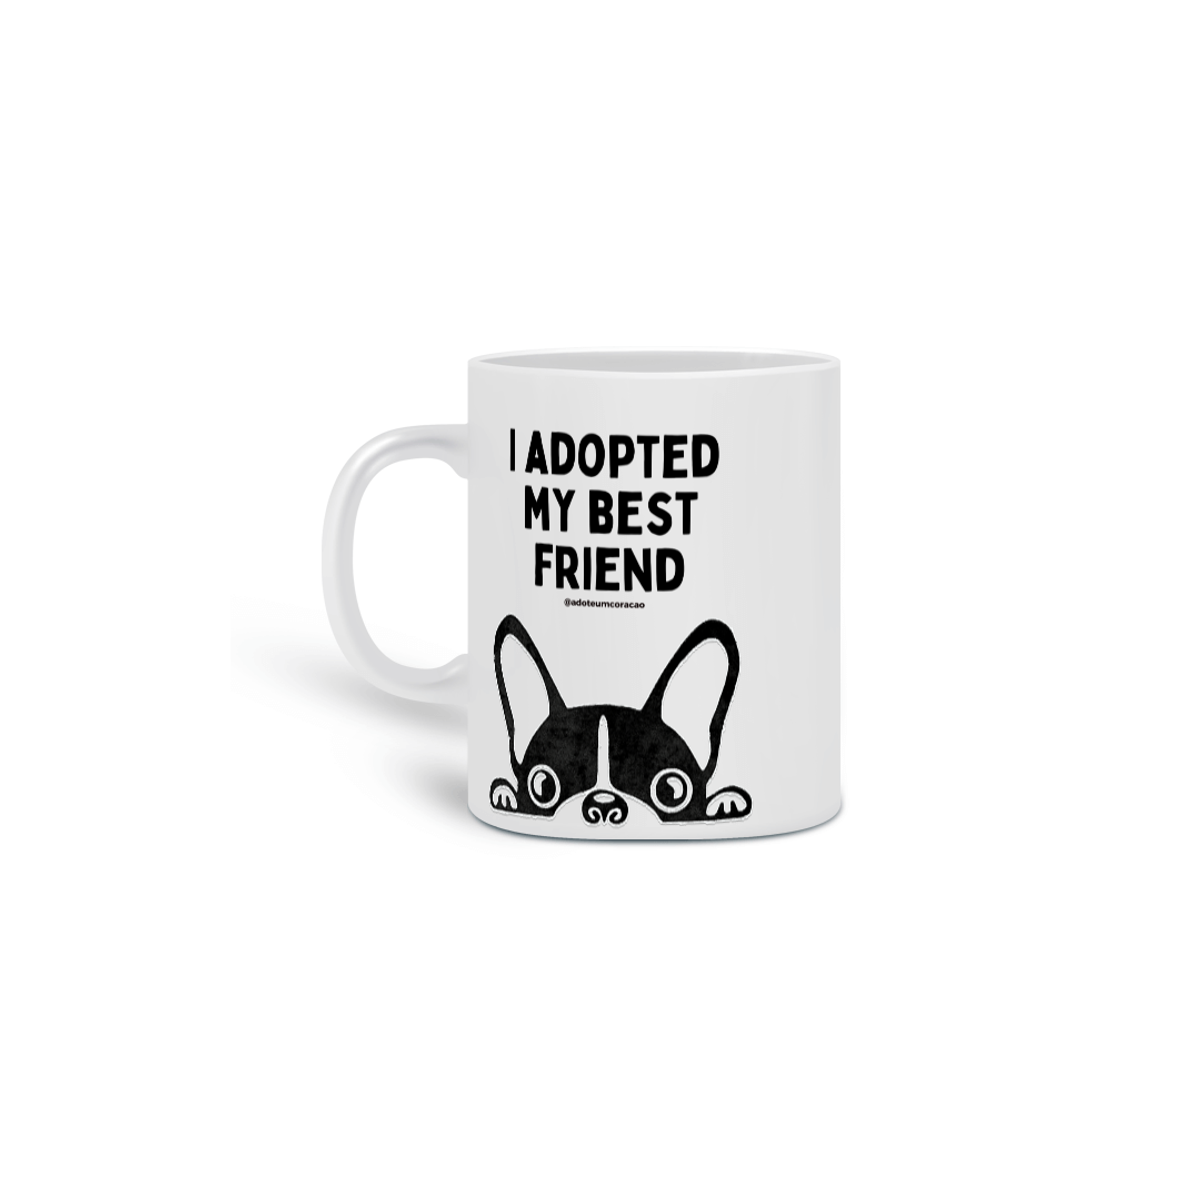 Nome do produto: I Adopted My Best Friend